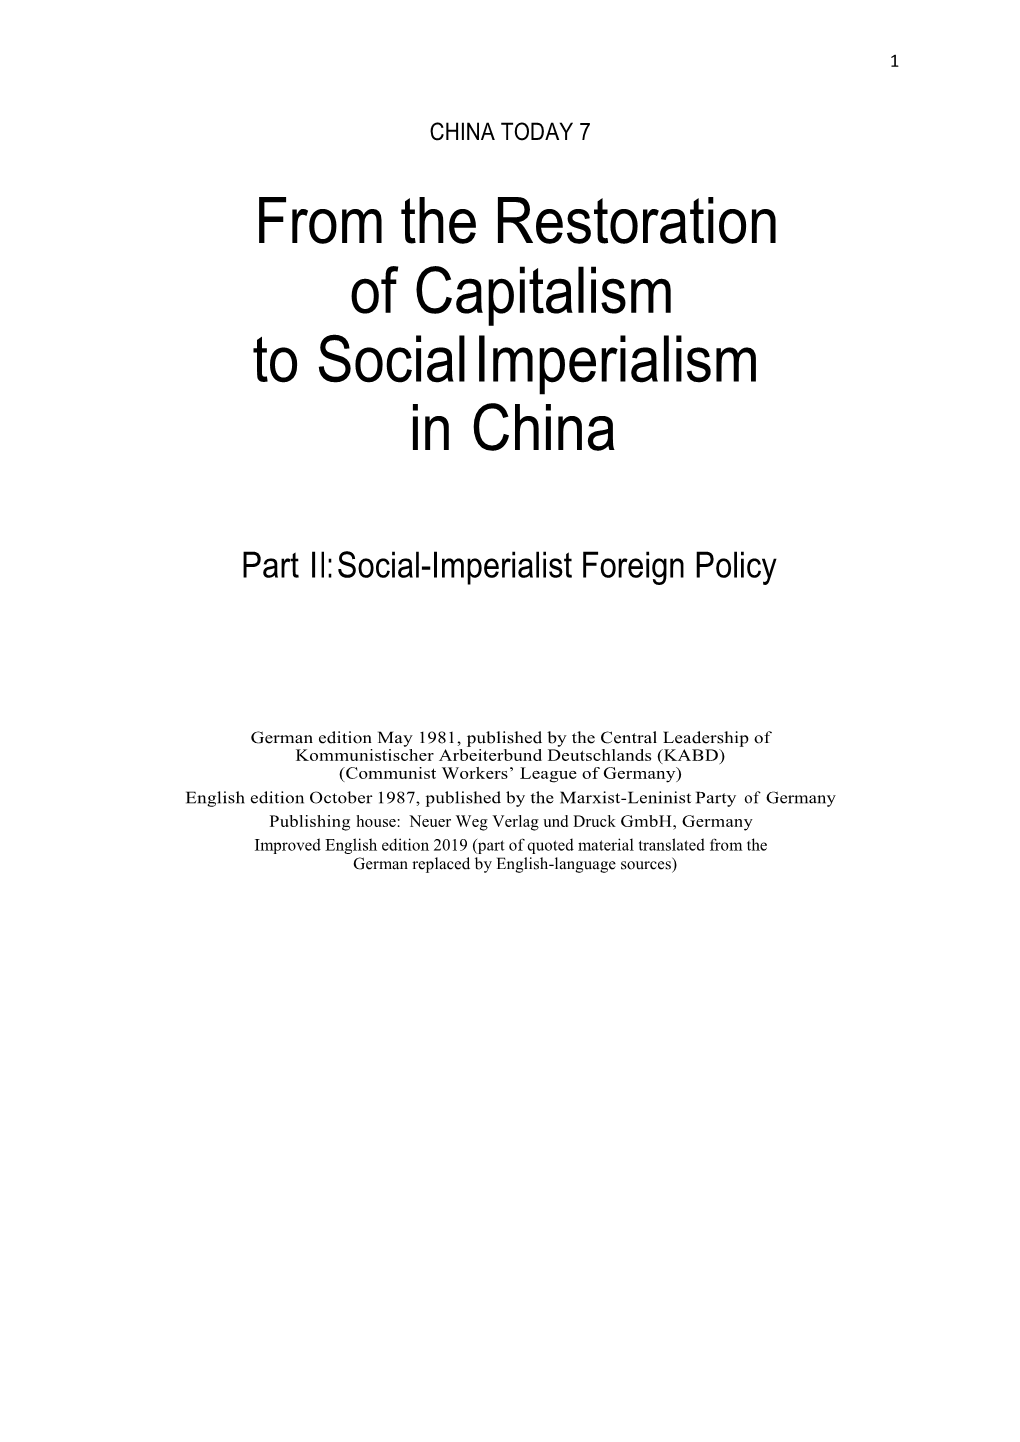 From the Restoration of Capitalism to Social Imperialism in China